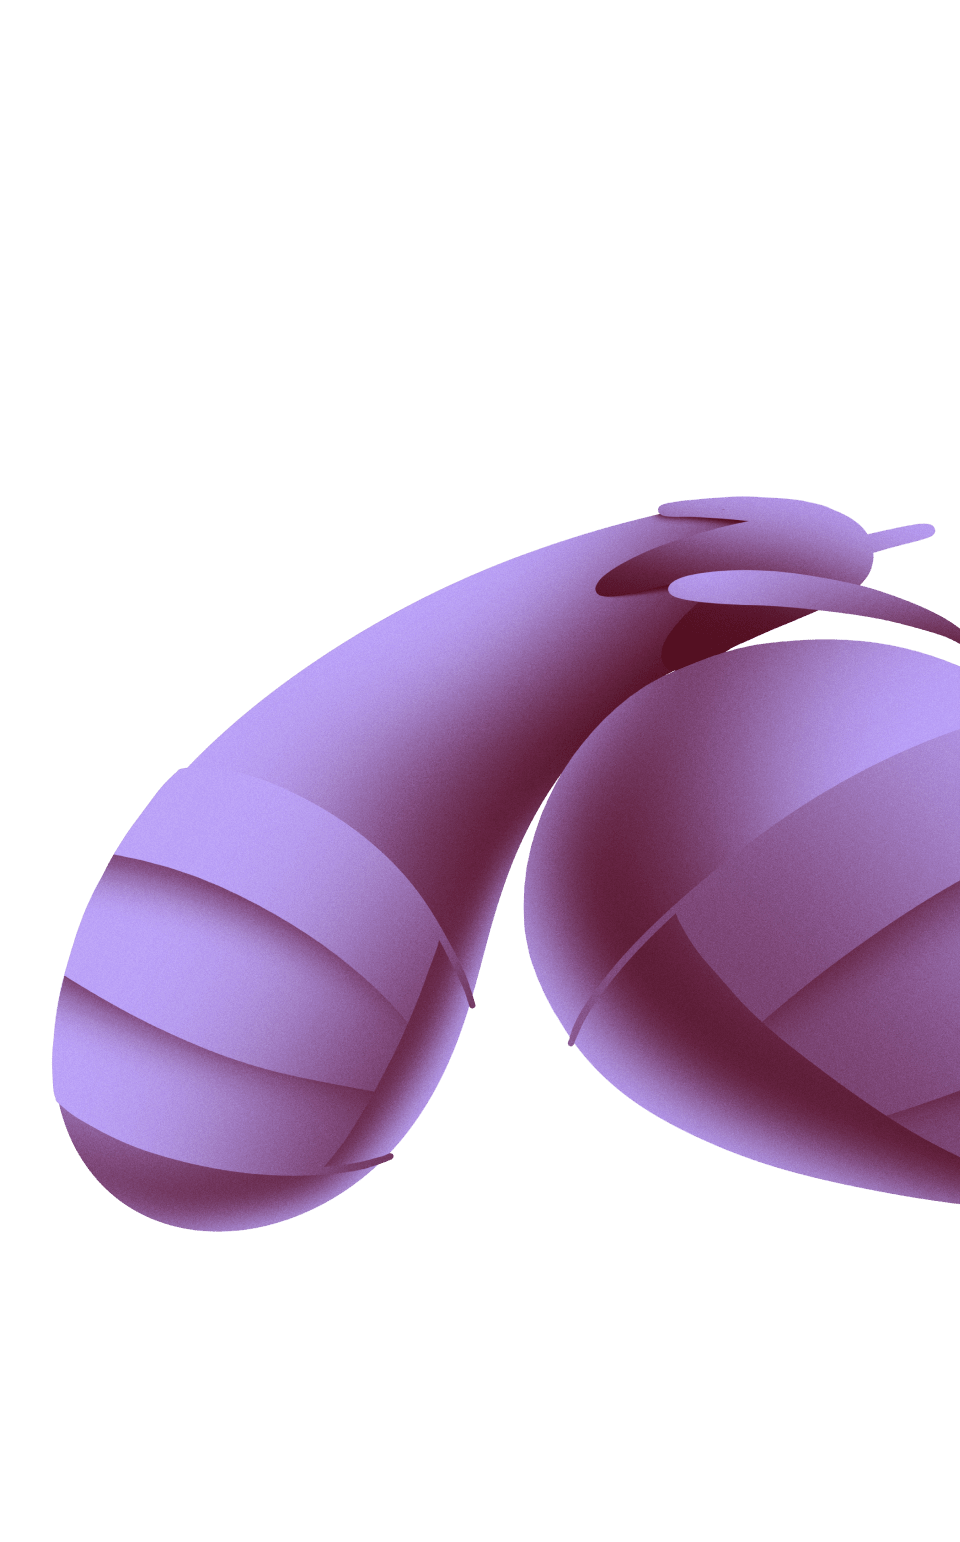 Purple illustration of an eggplant and peach wrapped in bandages.